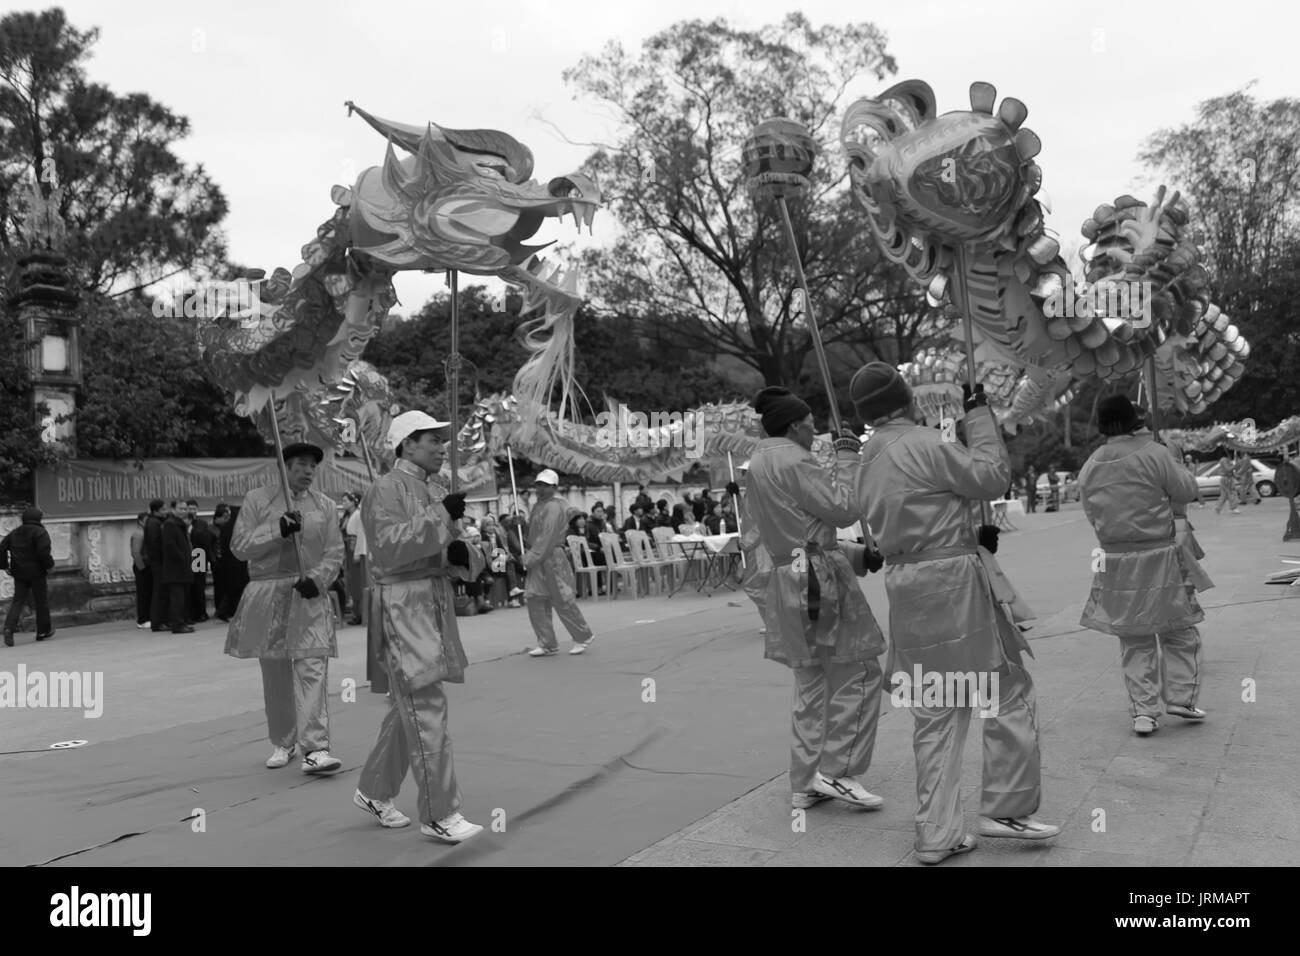 HAI DUONG, VIETNAM, February 14: a group of Asian people dance dragon in folk festivals on February 14, 2014 in Con Son pagoda, Hai Duong, Vietnam. Stock Photo